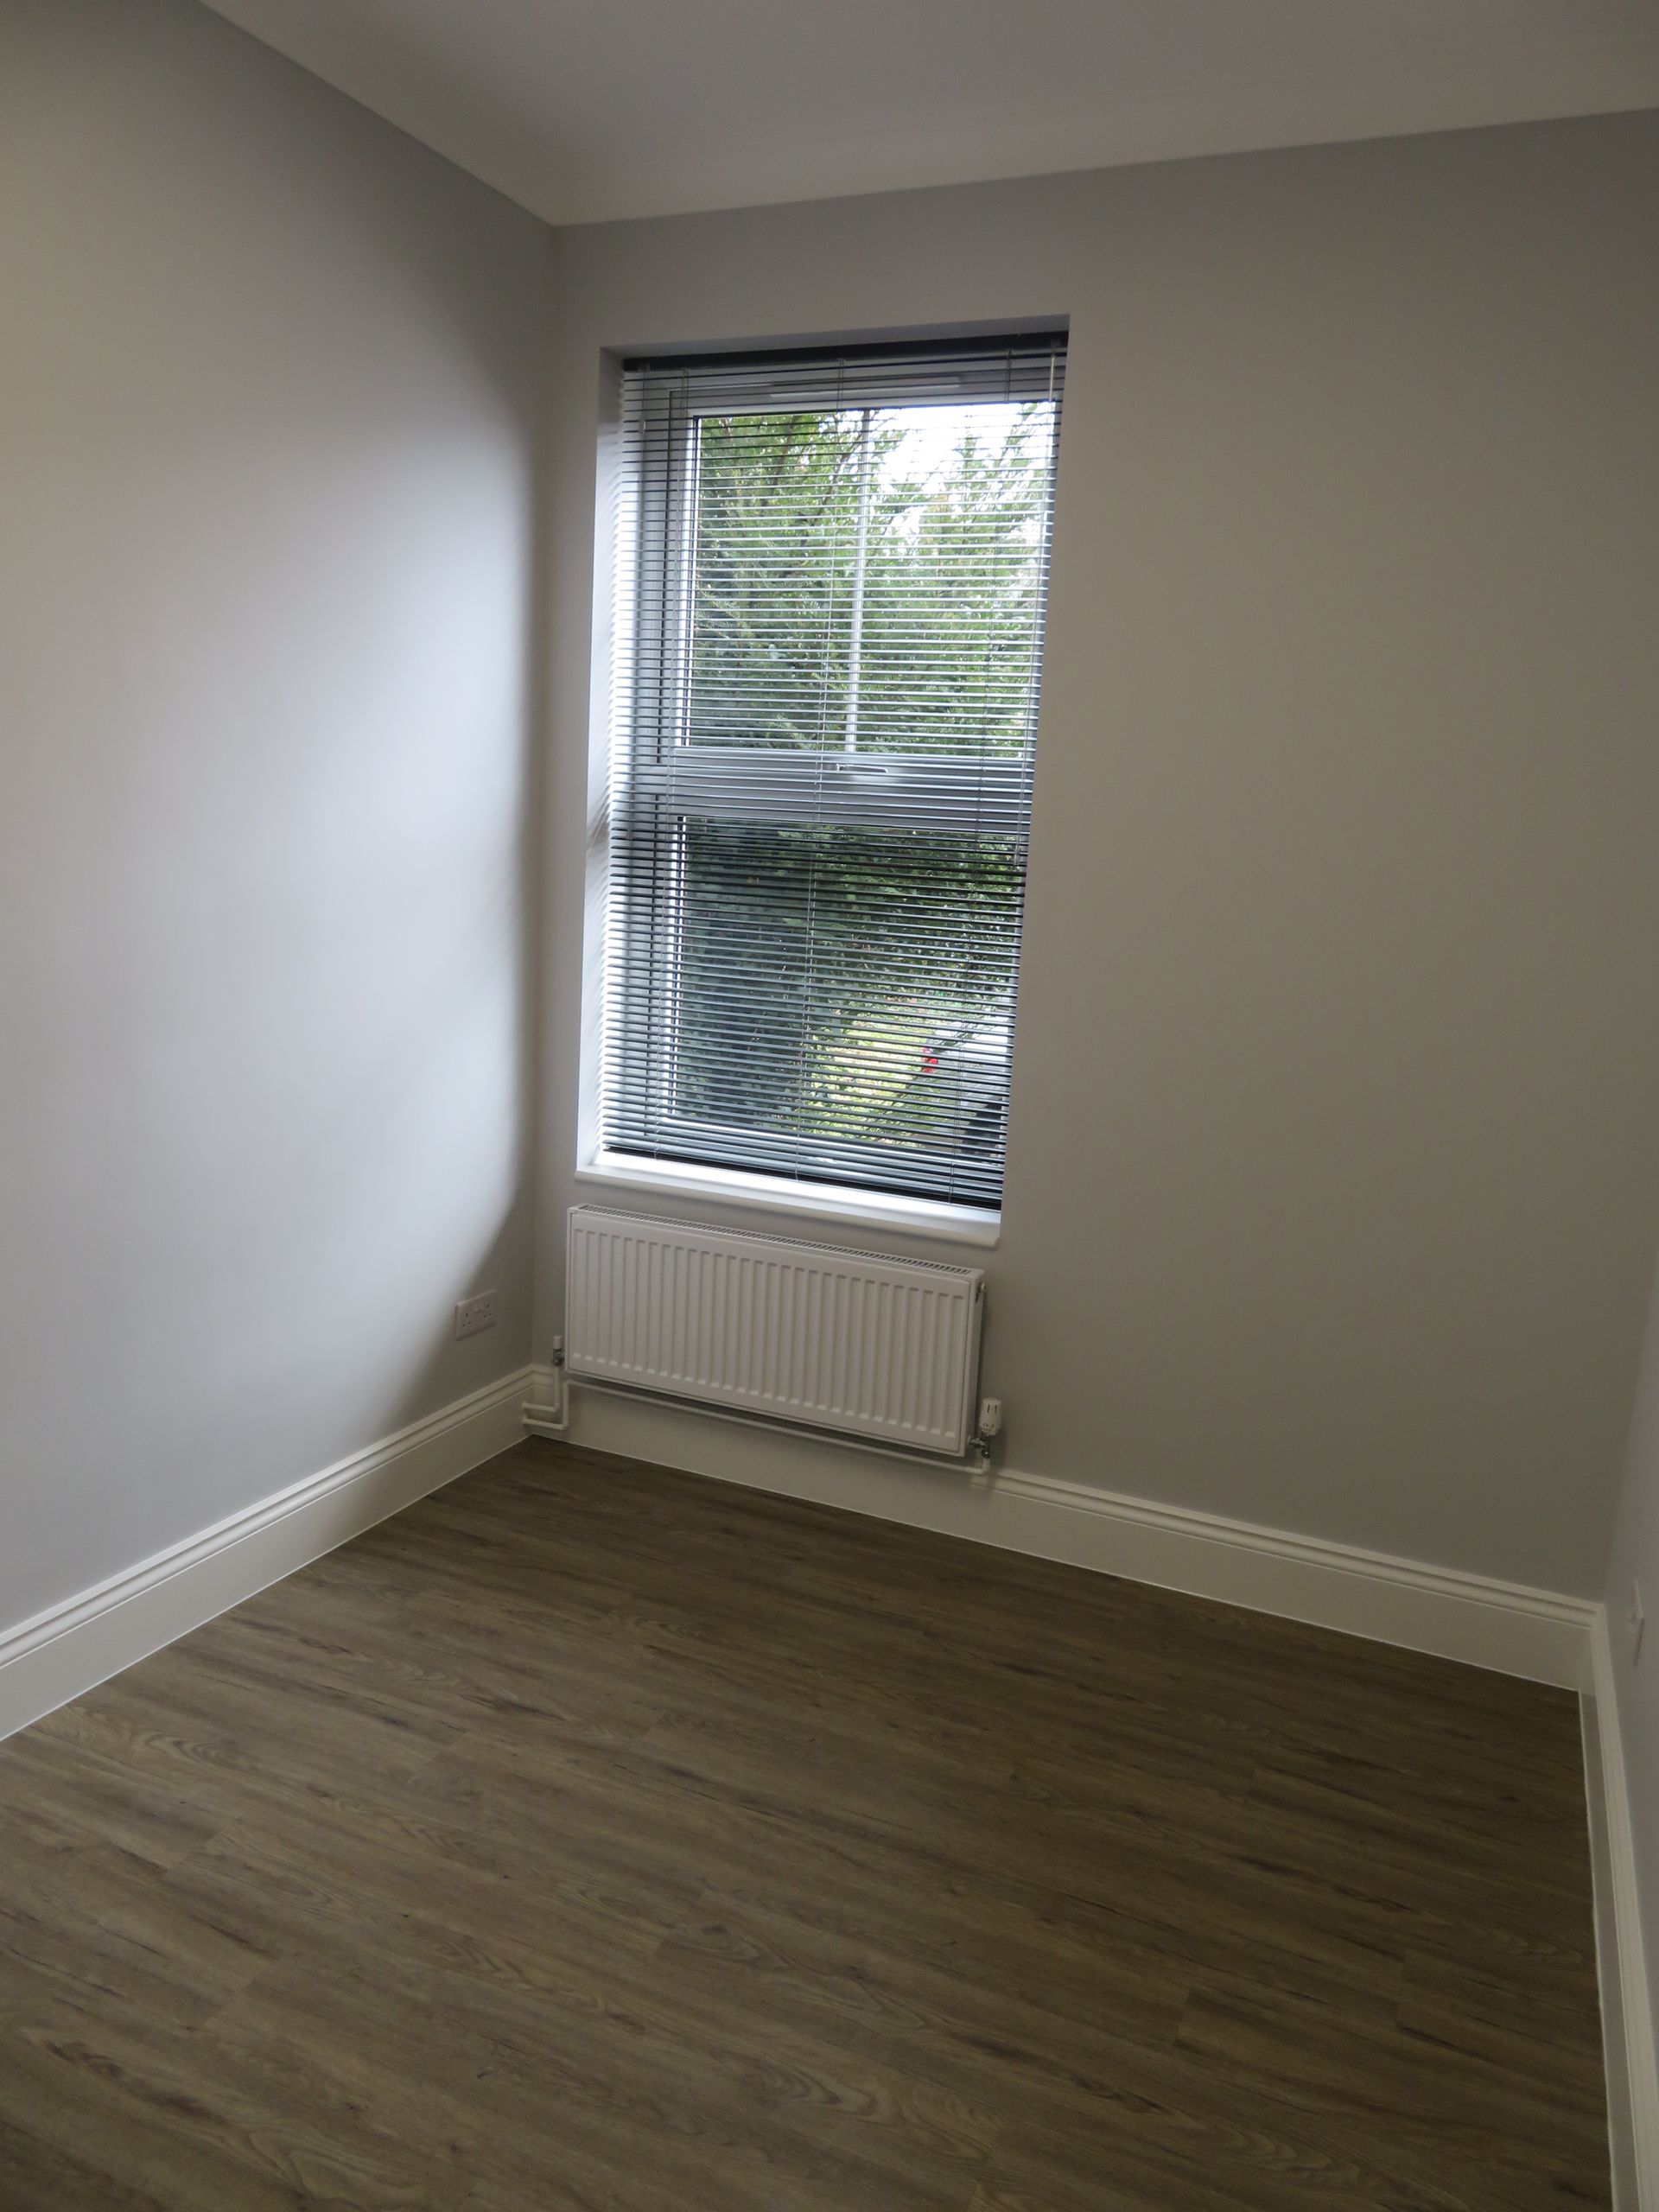 1 bed flat to rent reading